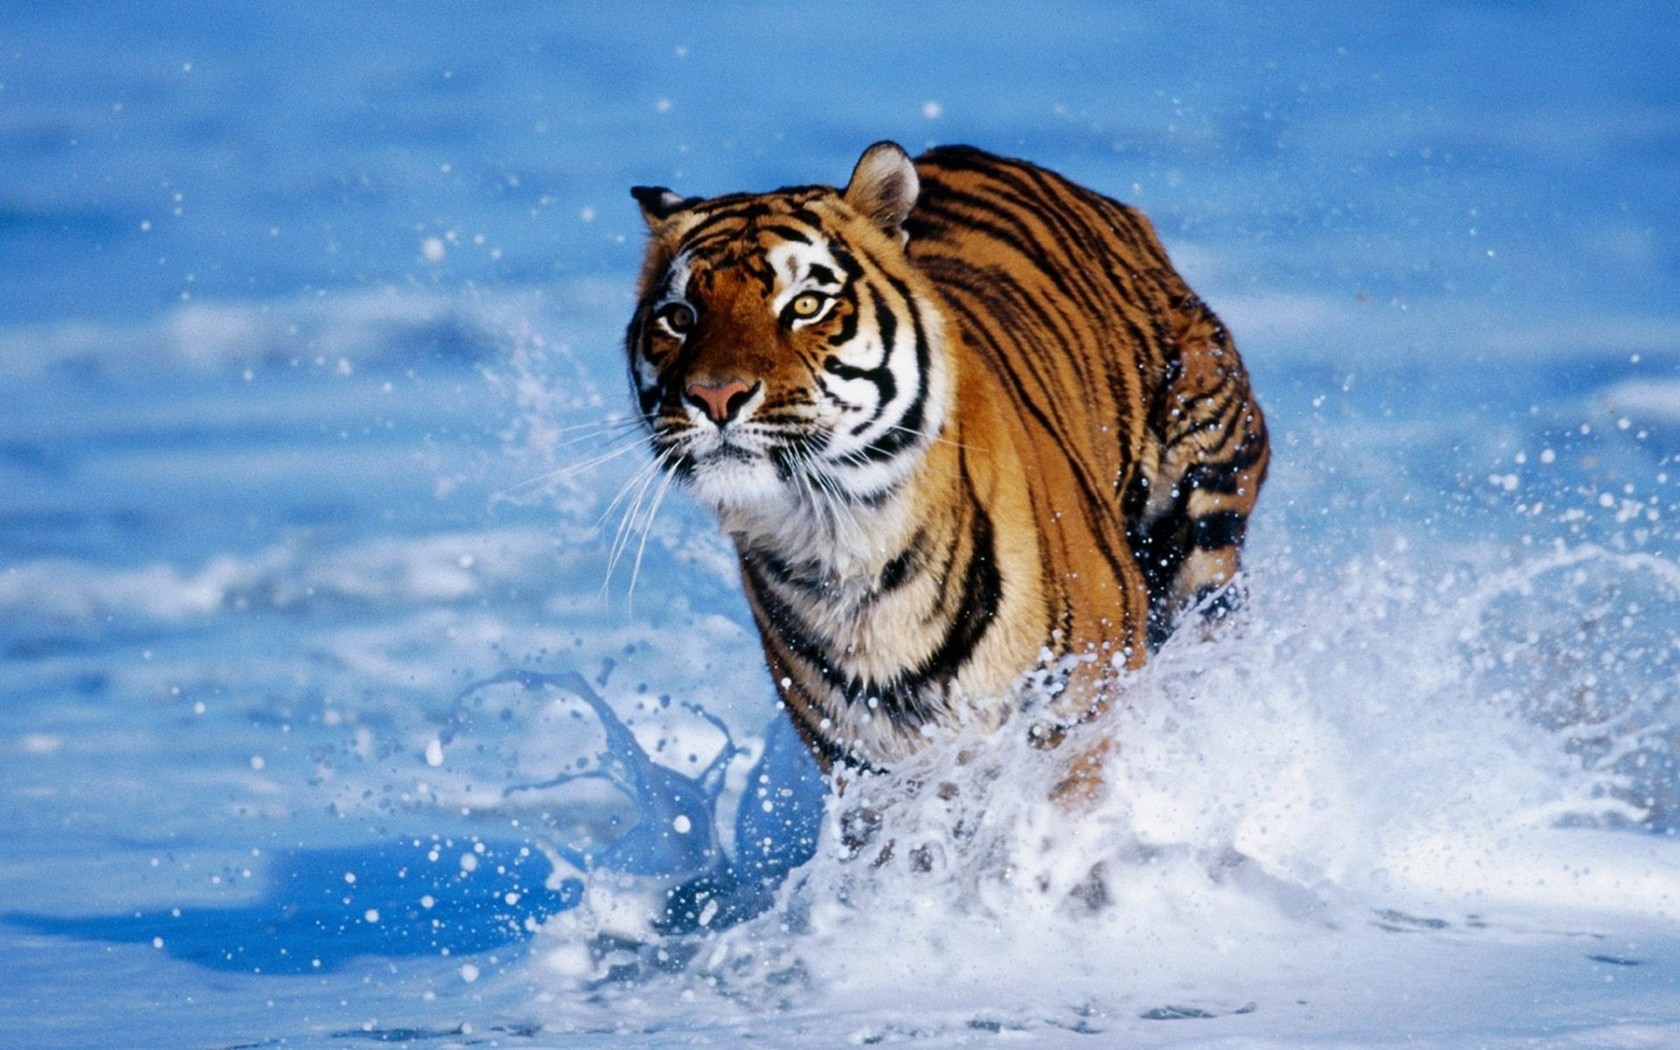 Tiger Running In The Water Wallpaper